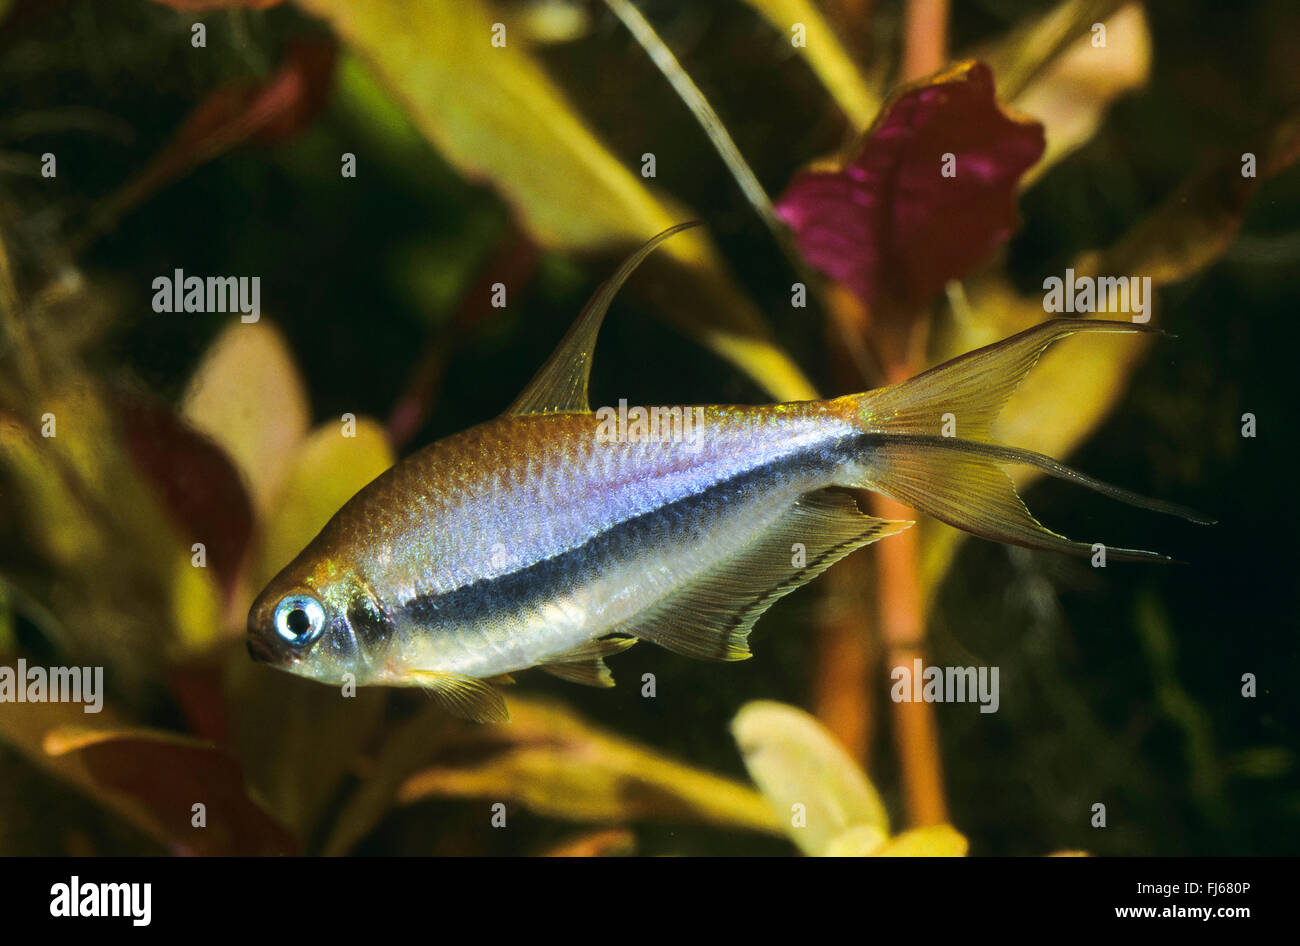 Black emperor tetra – side view, tropical freshwater